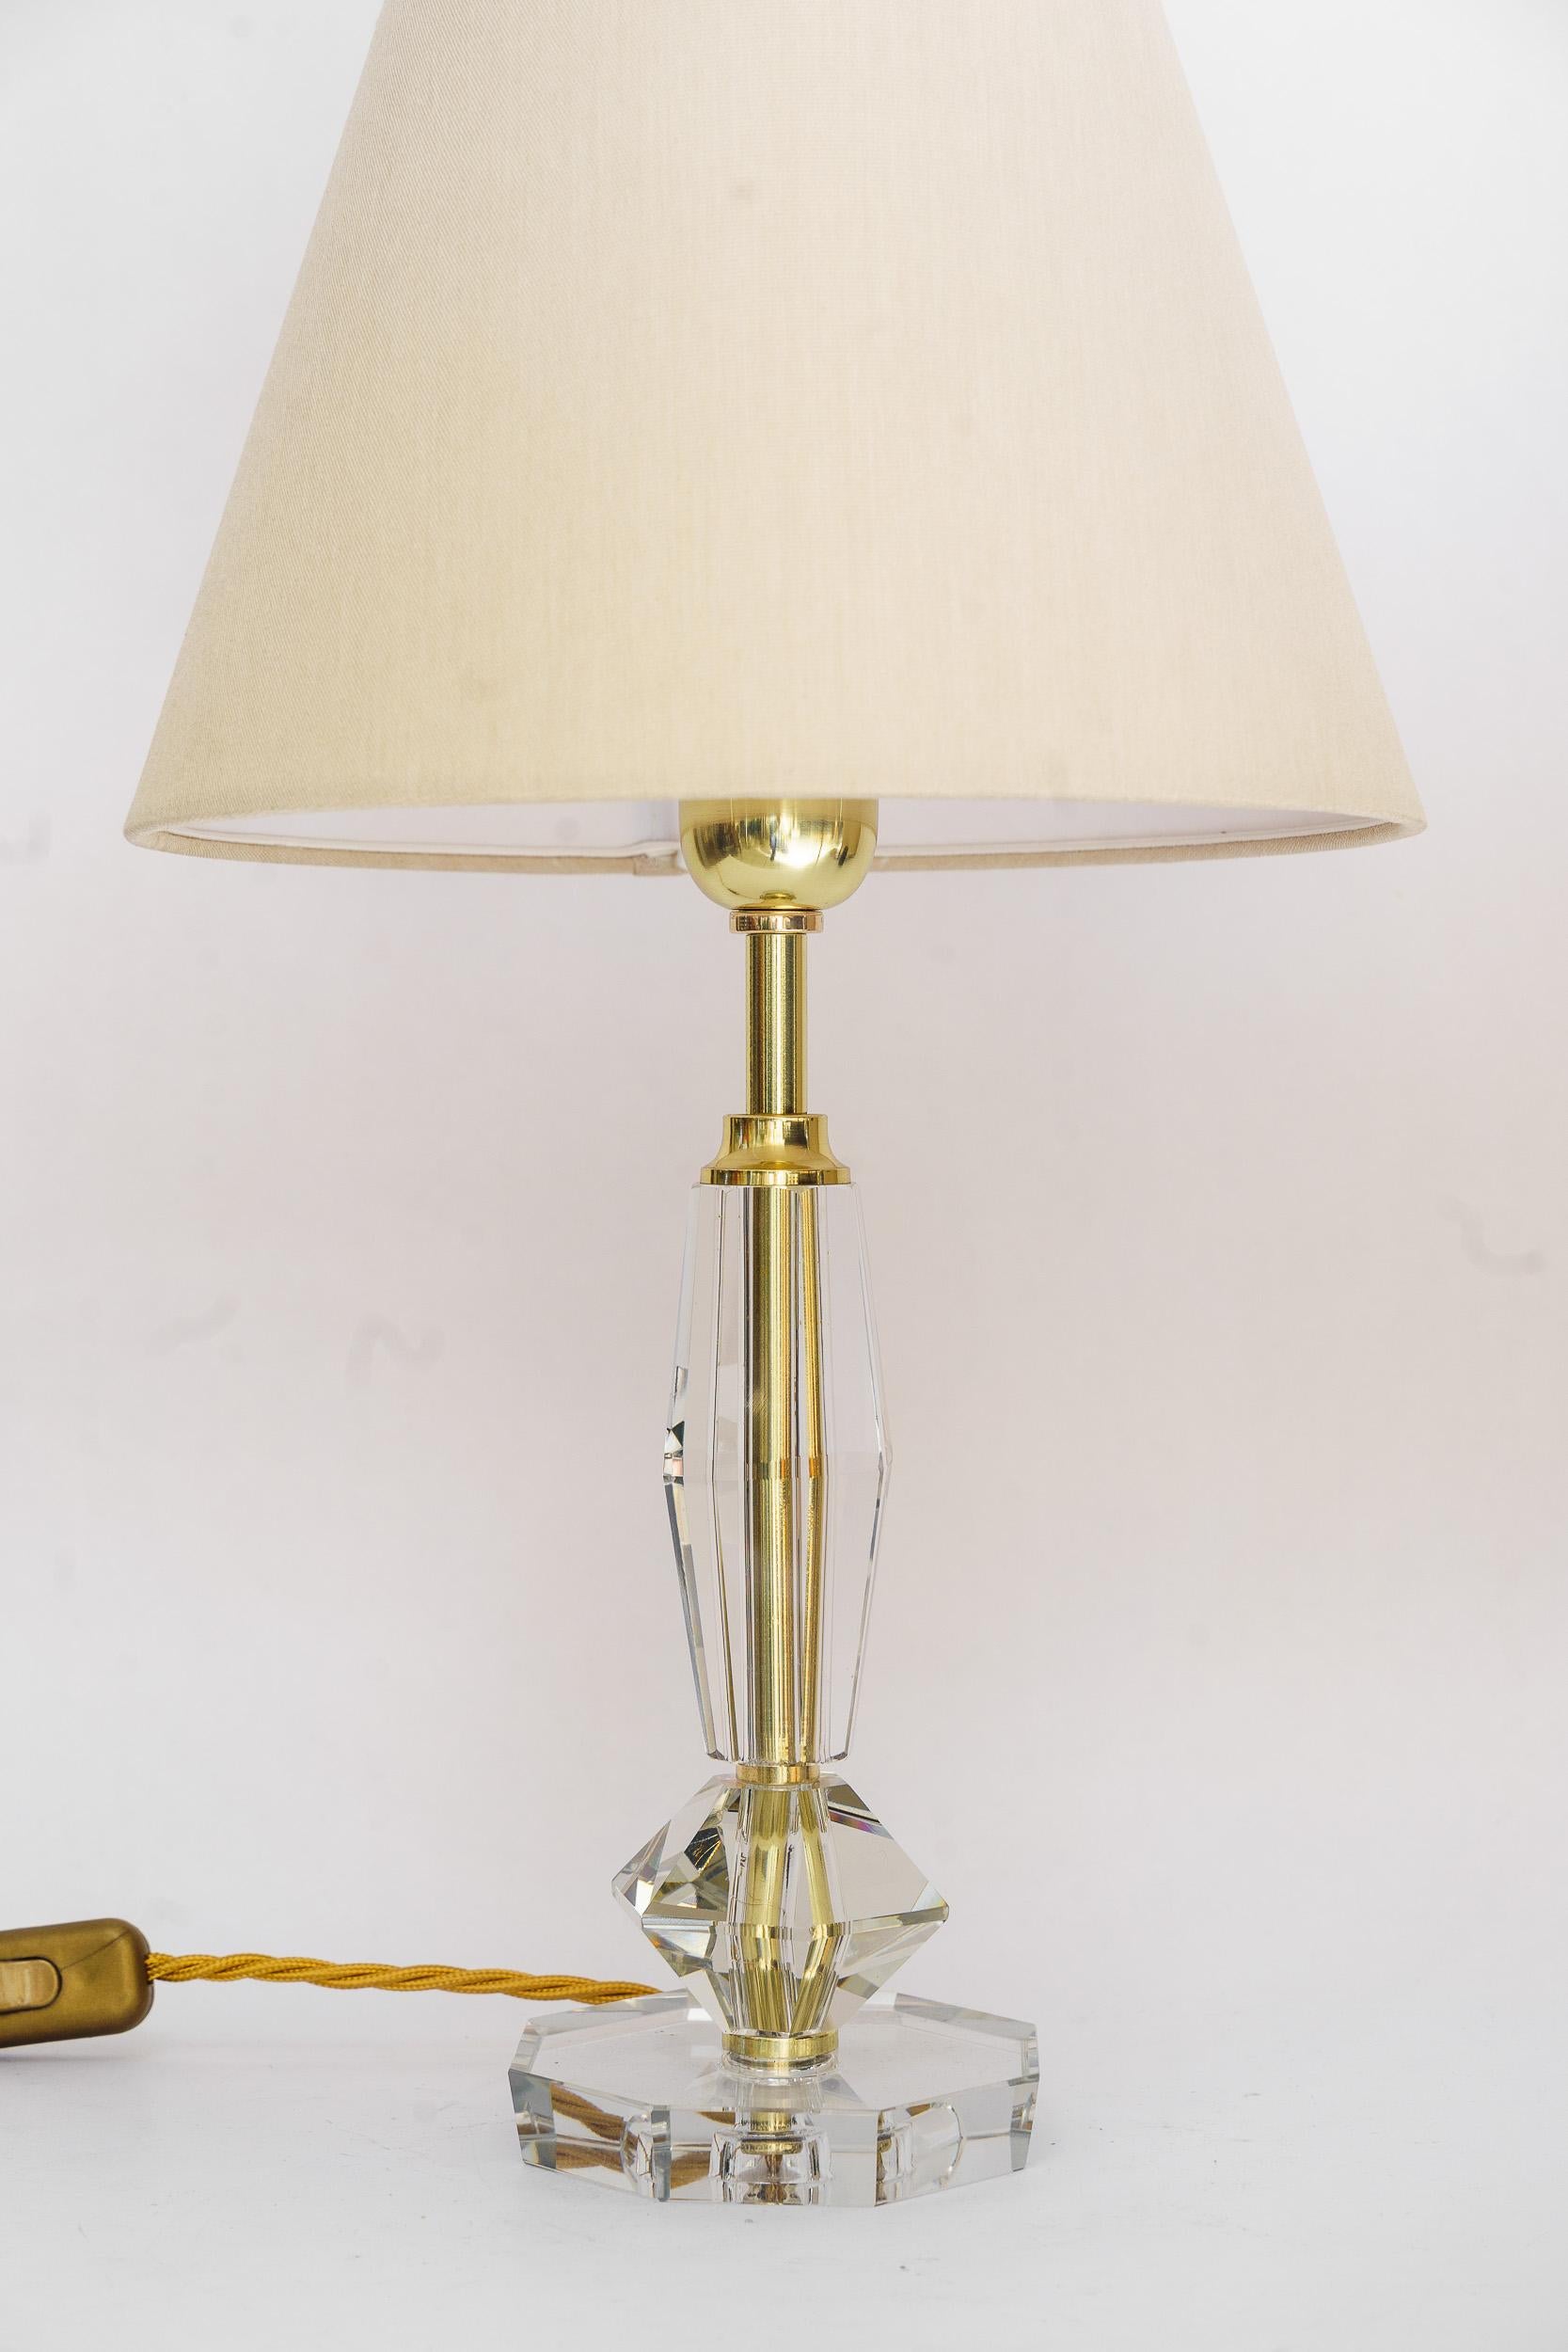 Big Art Deco bakalowits table lamp vienna around 1920s
Hight quality glass table lamp
The fabric shade is replaced ( new )